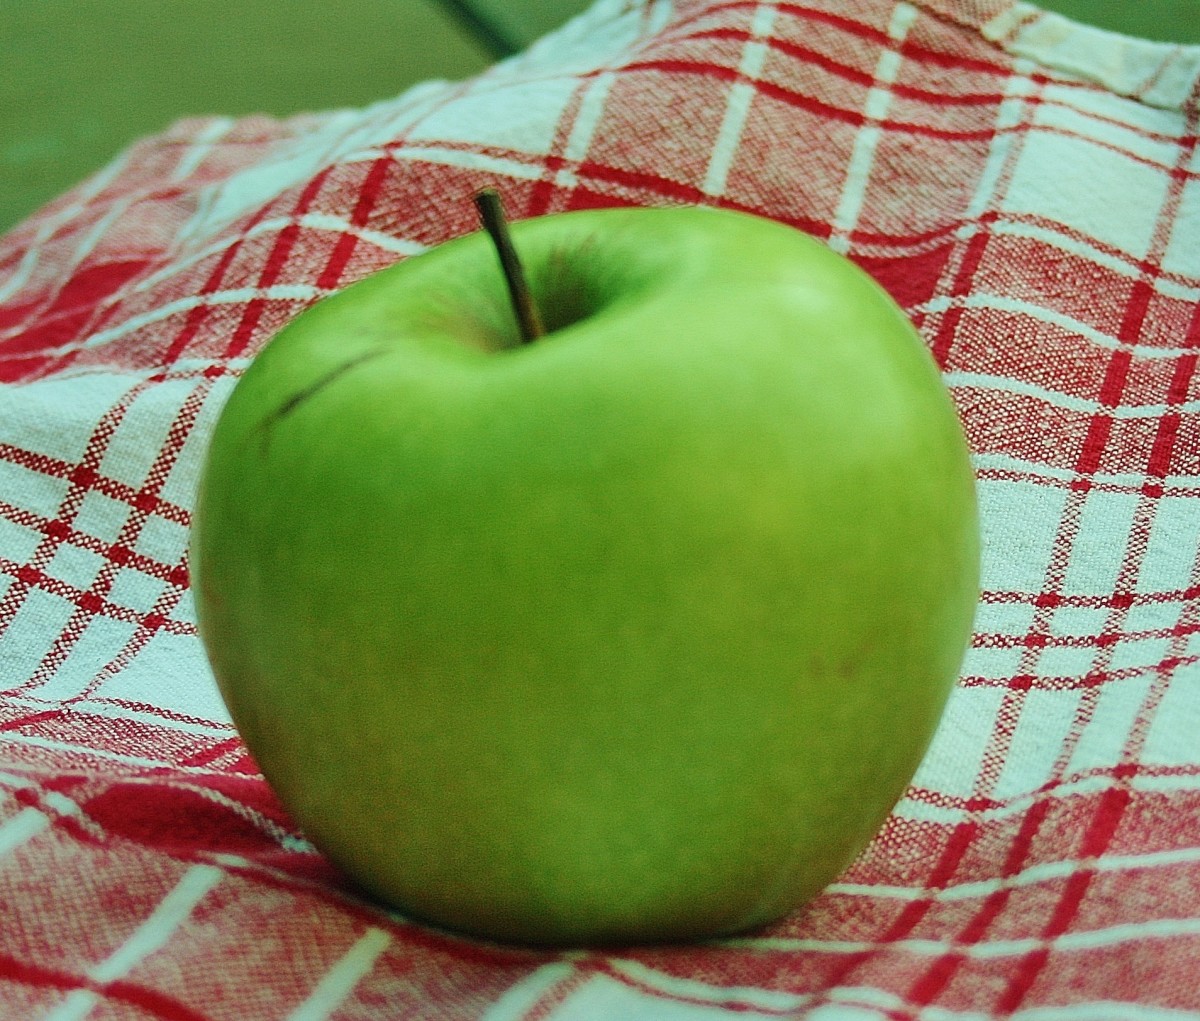 Granny Smith apples are firm & tart, perfect for this sweet & creamy apple pie recipe.